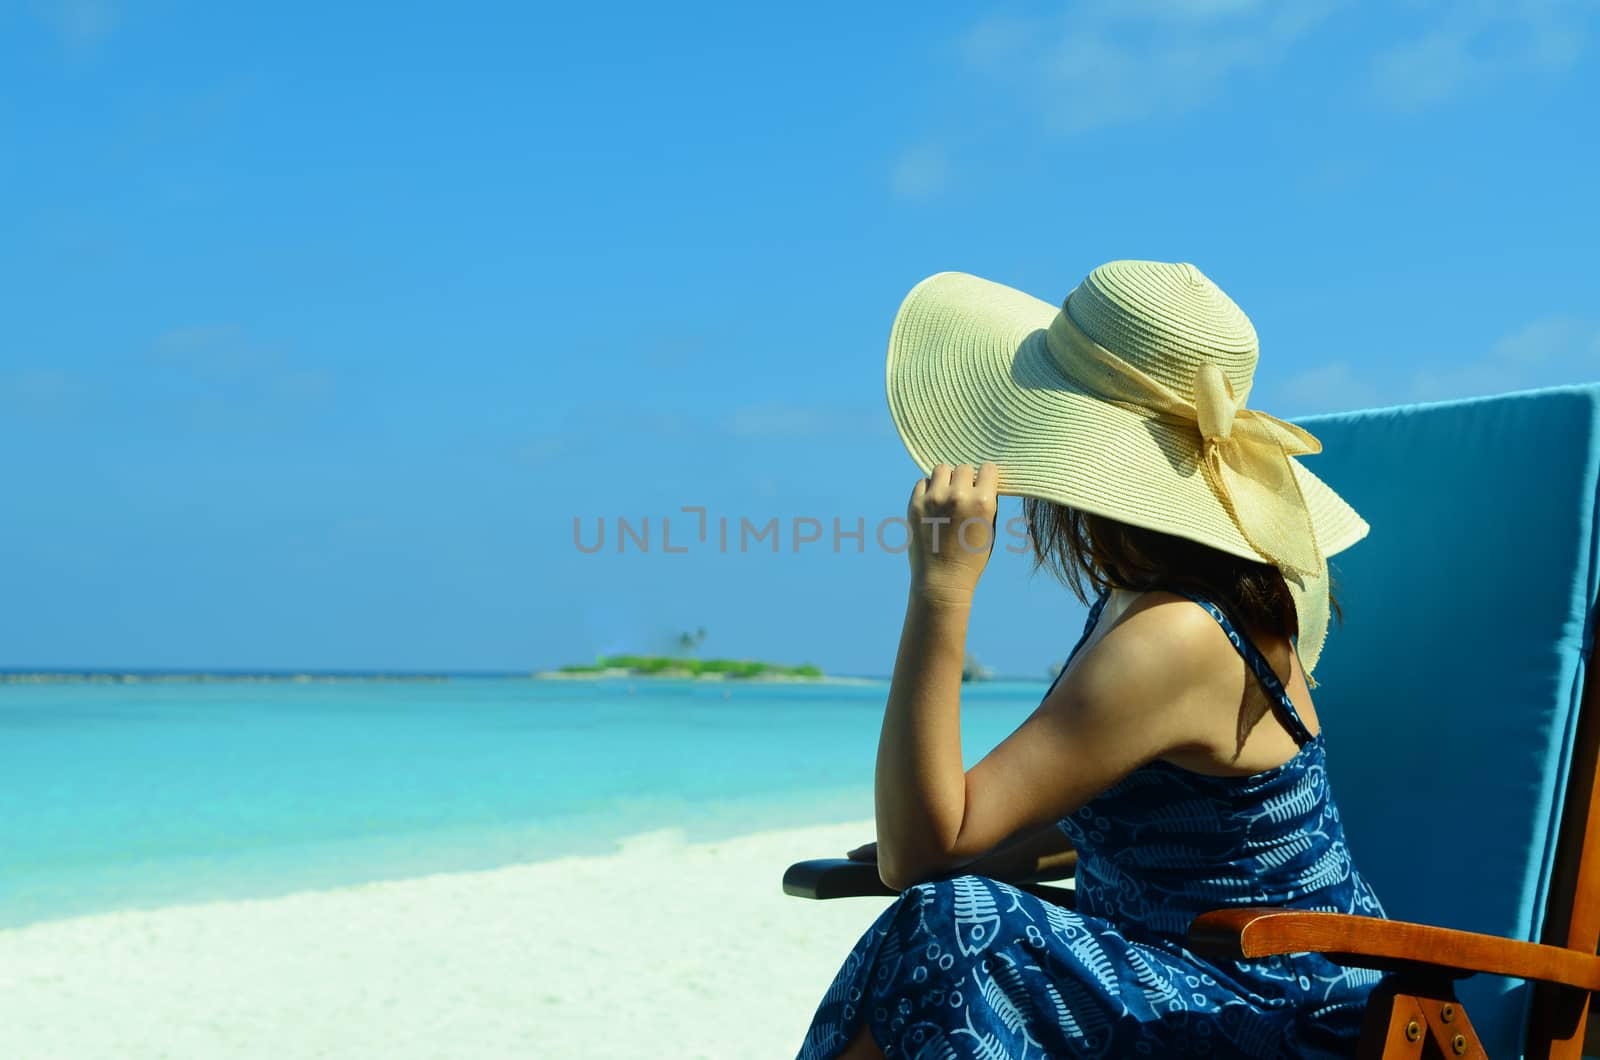 close-up portrait of a beautiful young asian girl with long hair on a background of blue sea and sky with clouds on a sunny day, lifestyle, posing and smiling.